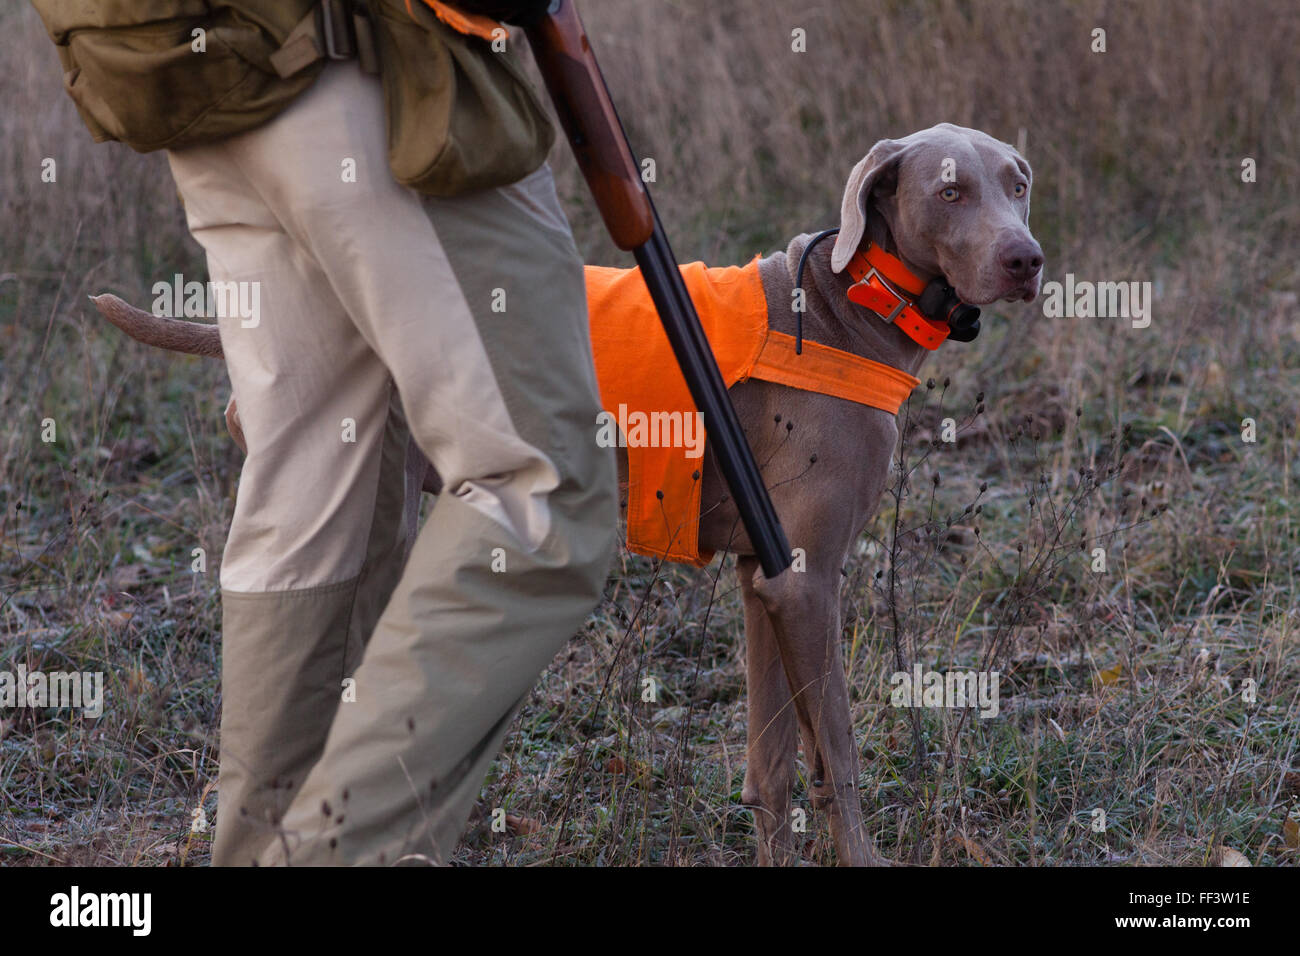 Hunting dog next to hunter in the field wearing an orange vest. Stock Photo